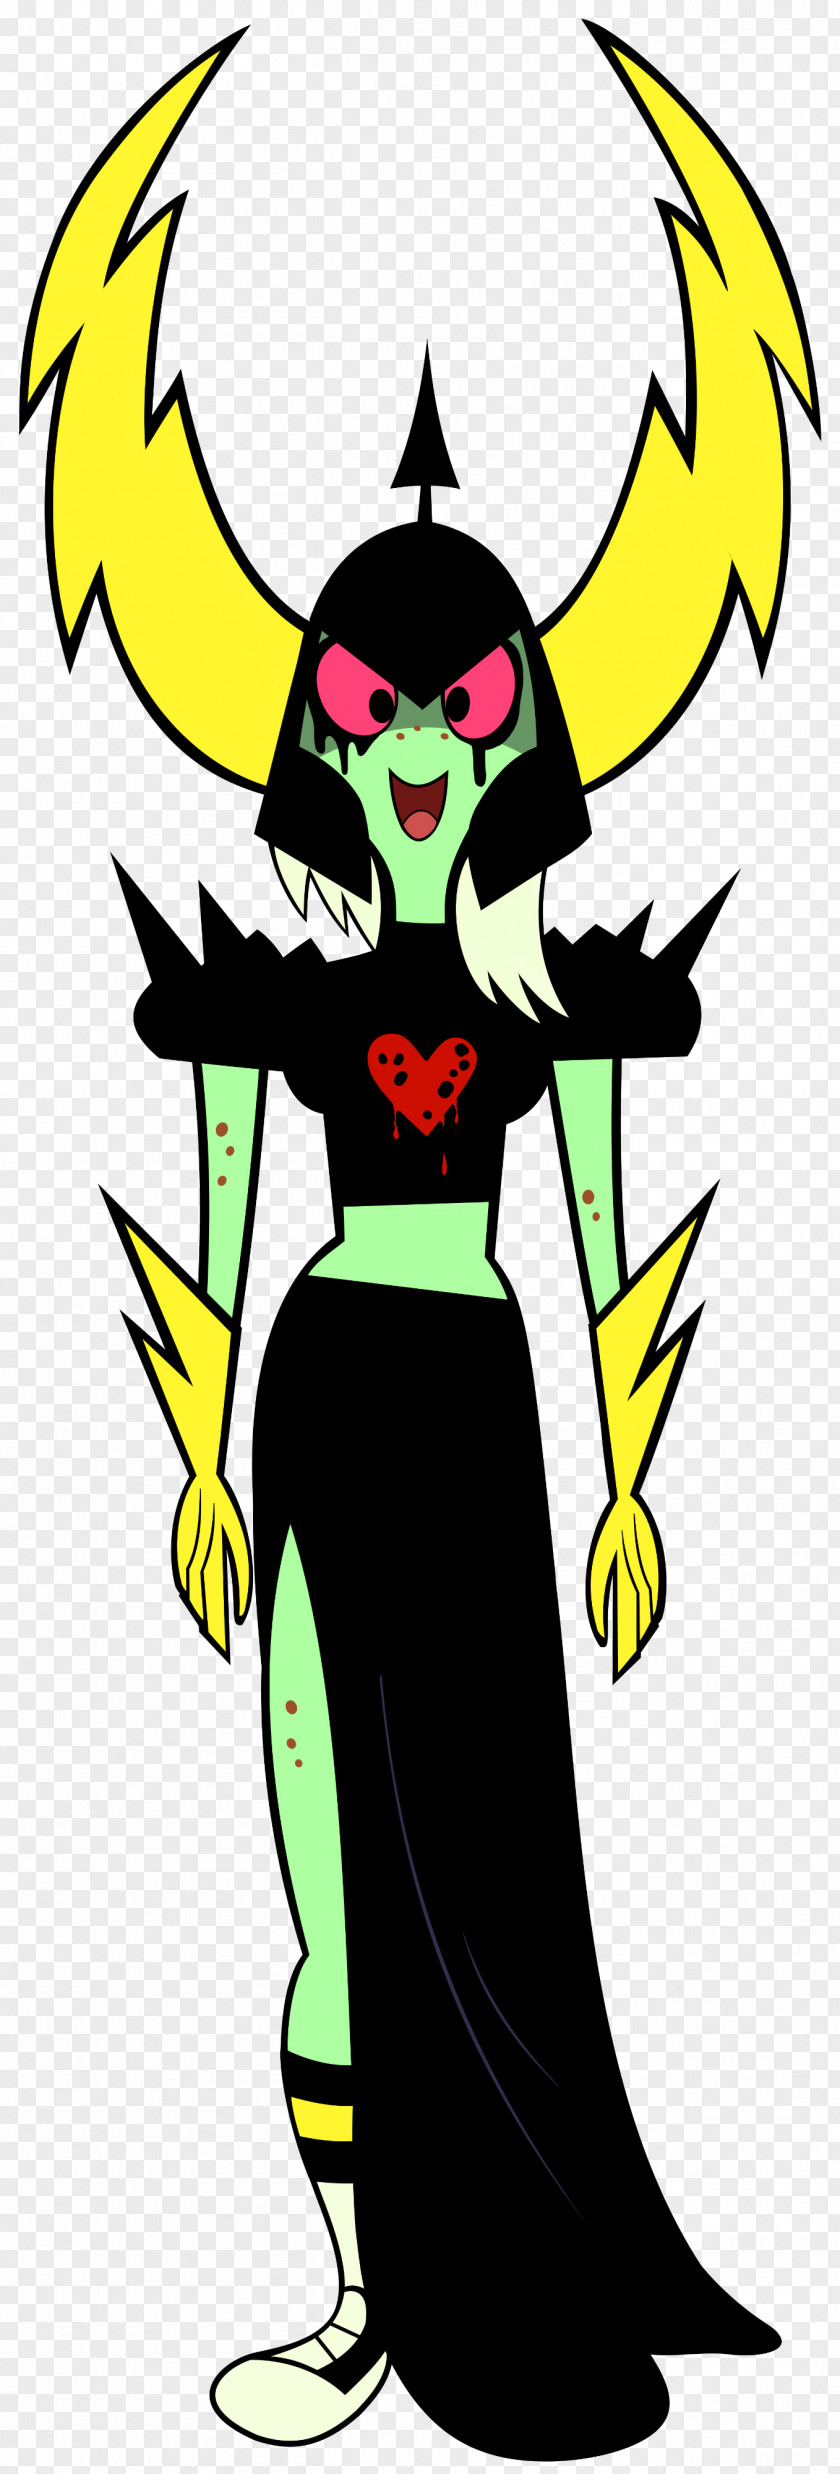 Lord Hater Commander Peepers Villain Disney XD Wikia PNG